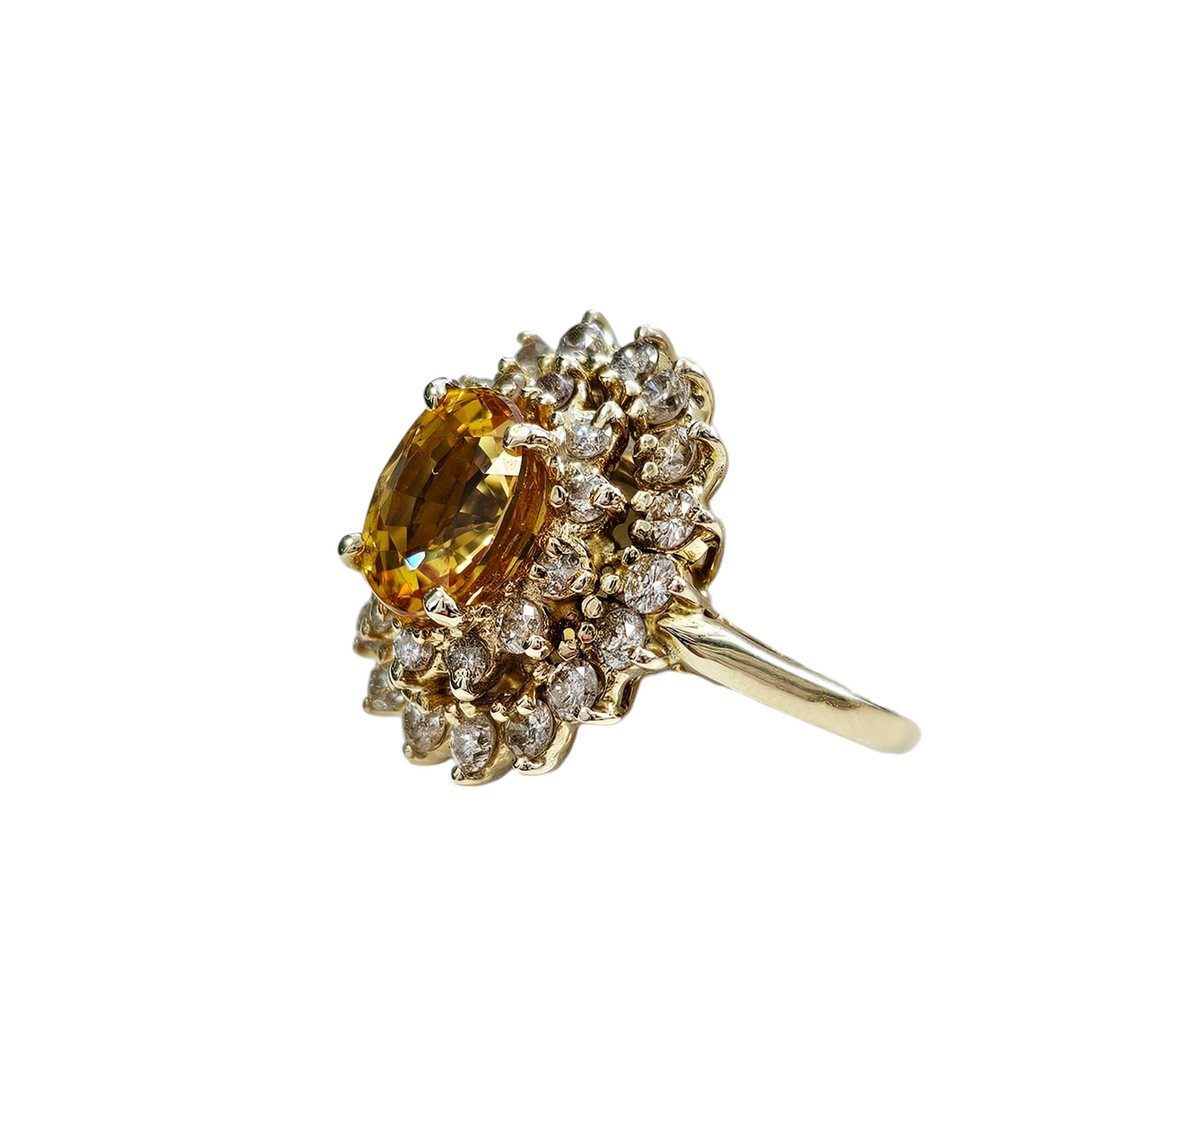 Oval Cut Yellow Sapphire with a Double Diamond Halo made in 14-Karat Yellow Gold